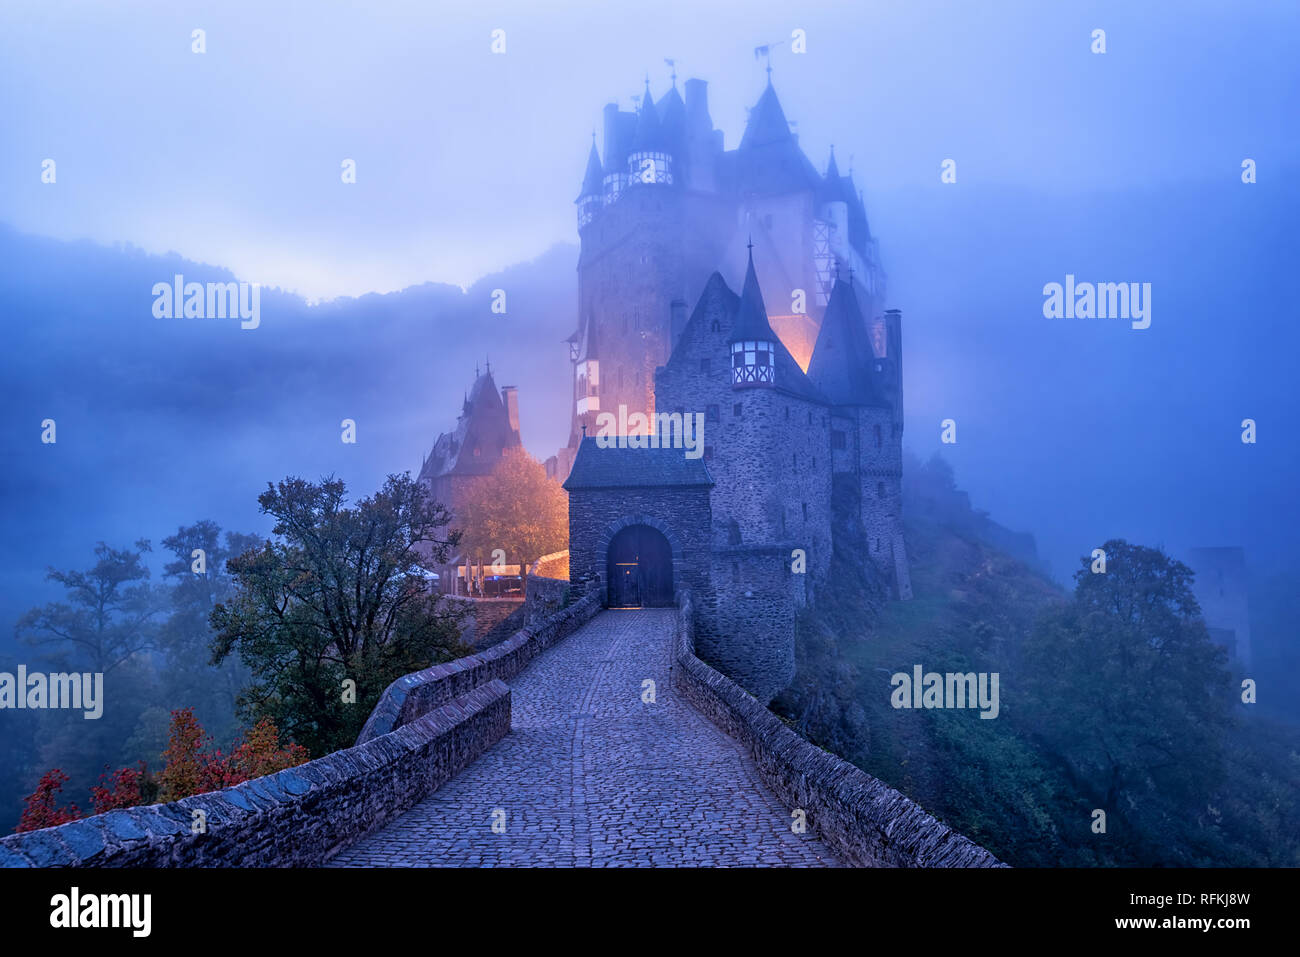 The Medieval Gothic Burg Eltz Castle In The Morning Mist Germany Eltz Castle Is One Of The Most Impressive And Famous Castles In Germany Stock Photo Alamy